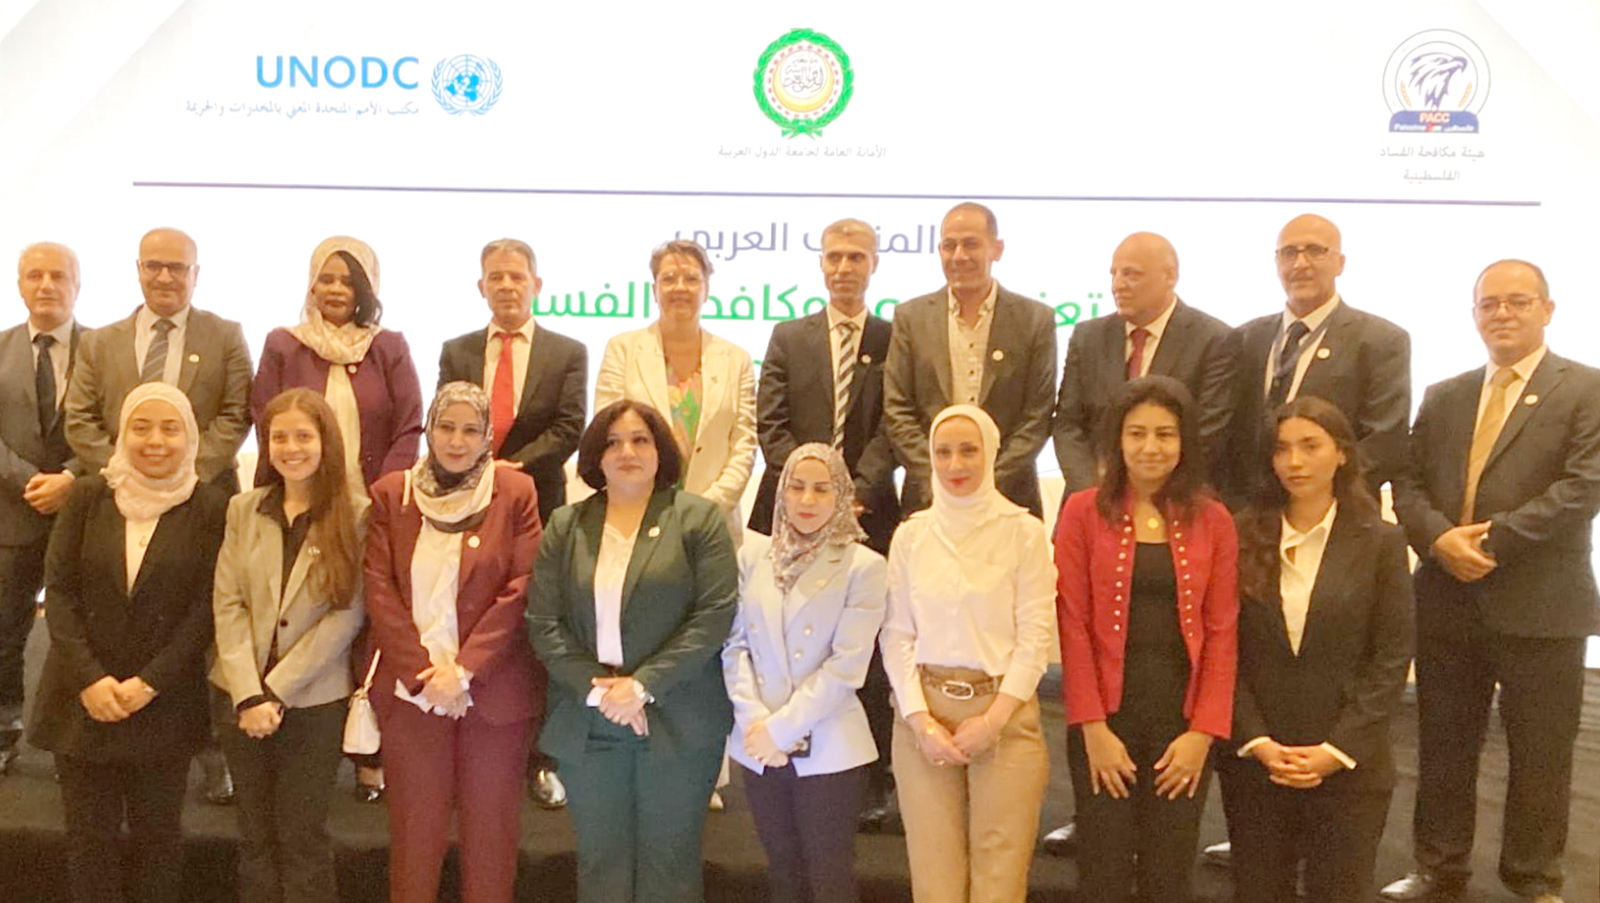 Group photo of participants in the Special Arab Forum